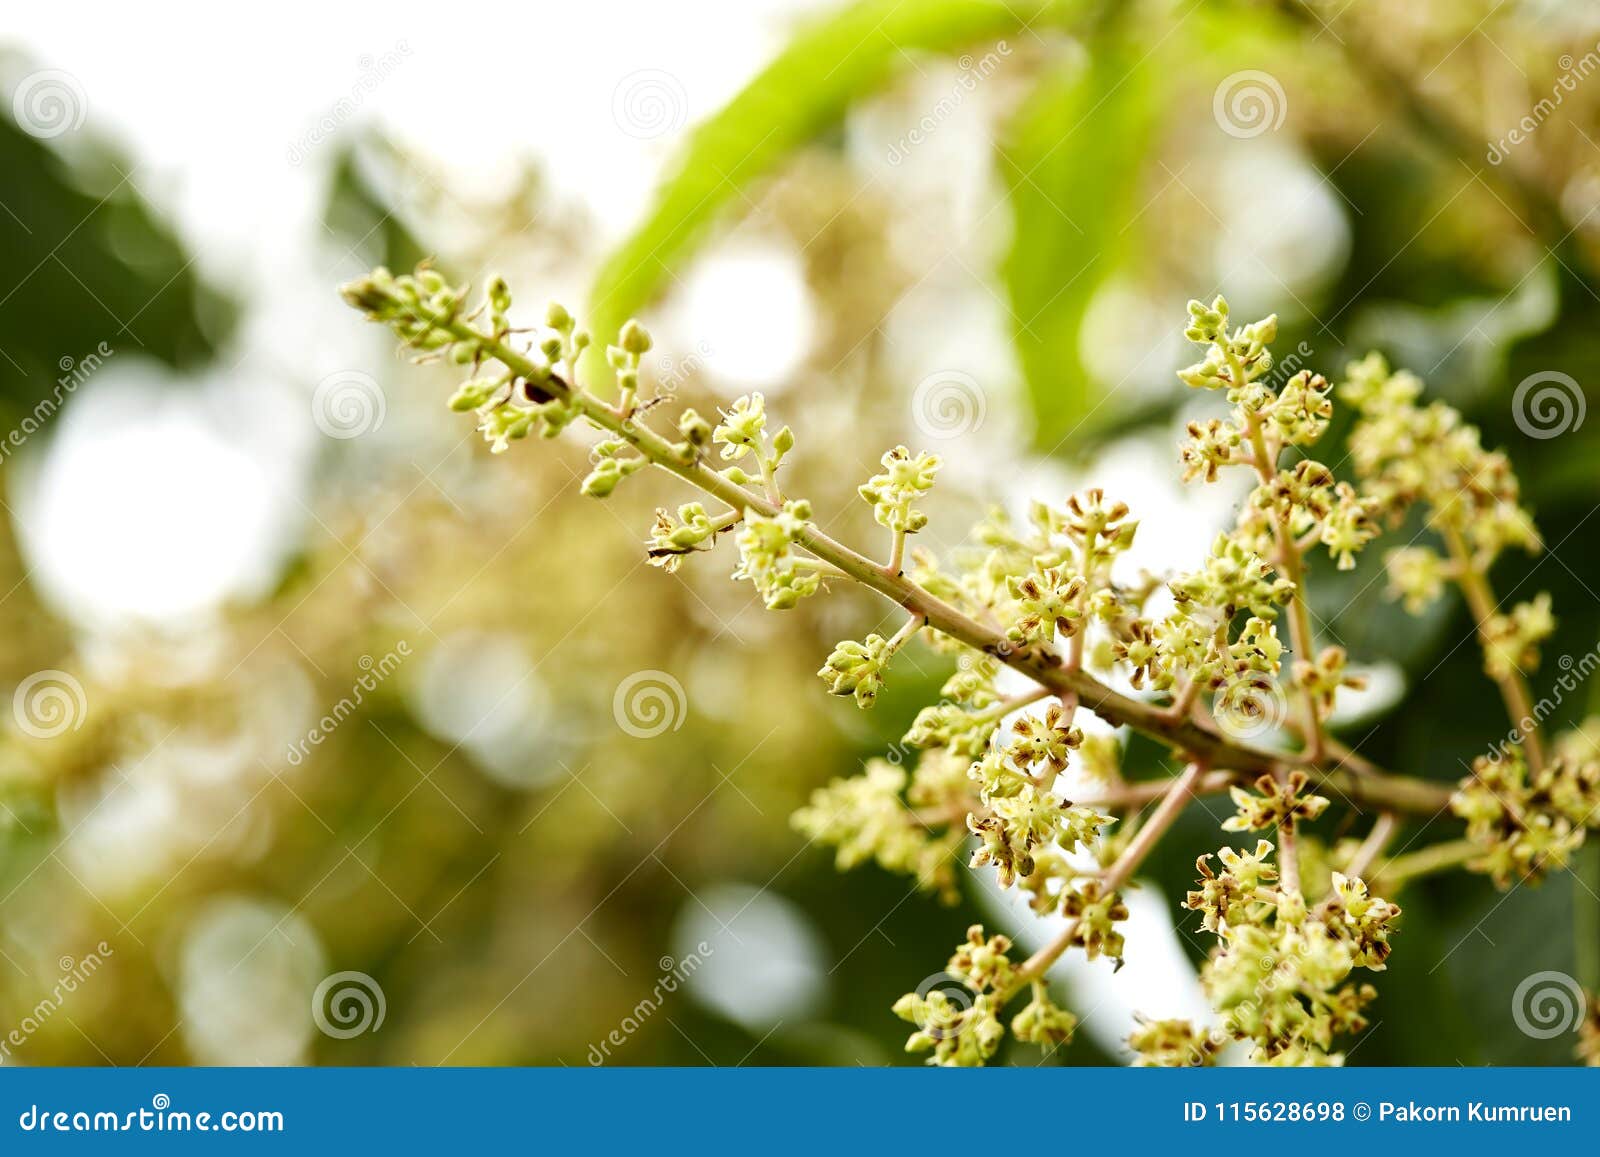 Footage of a Mango Tree in Full Bloom Stock Photo - Image of aromatic,  fresh: 115628698